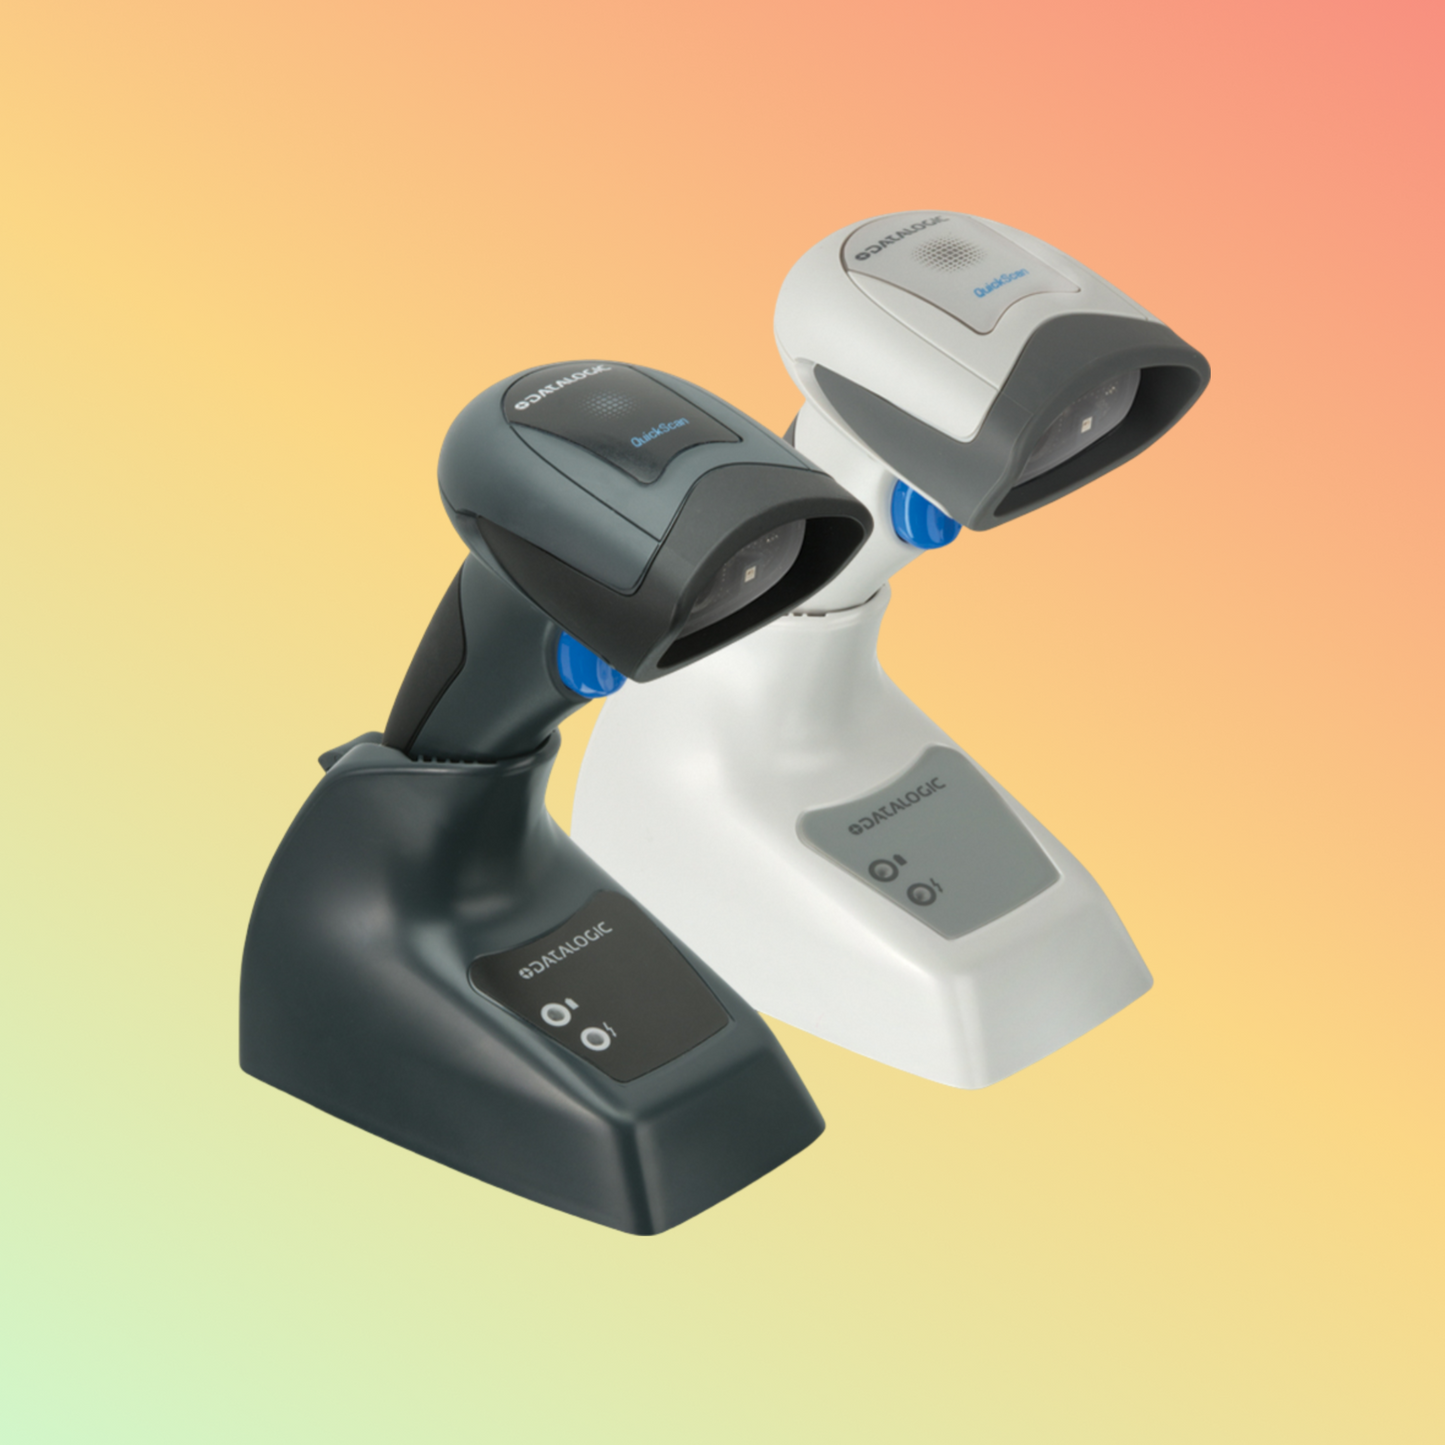 alt="Handheld DCI QM2400 2D Barcode Scanner with wireless capability"